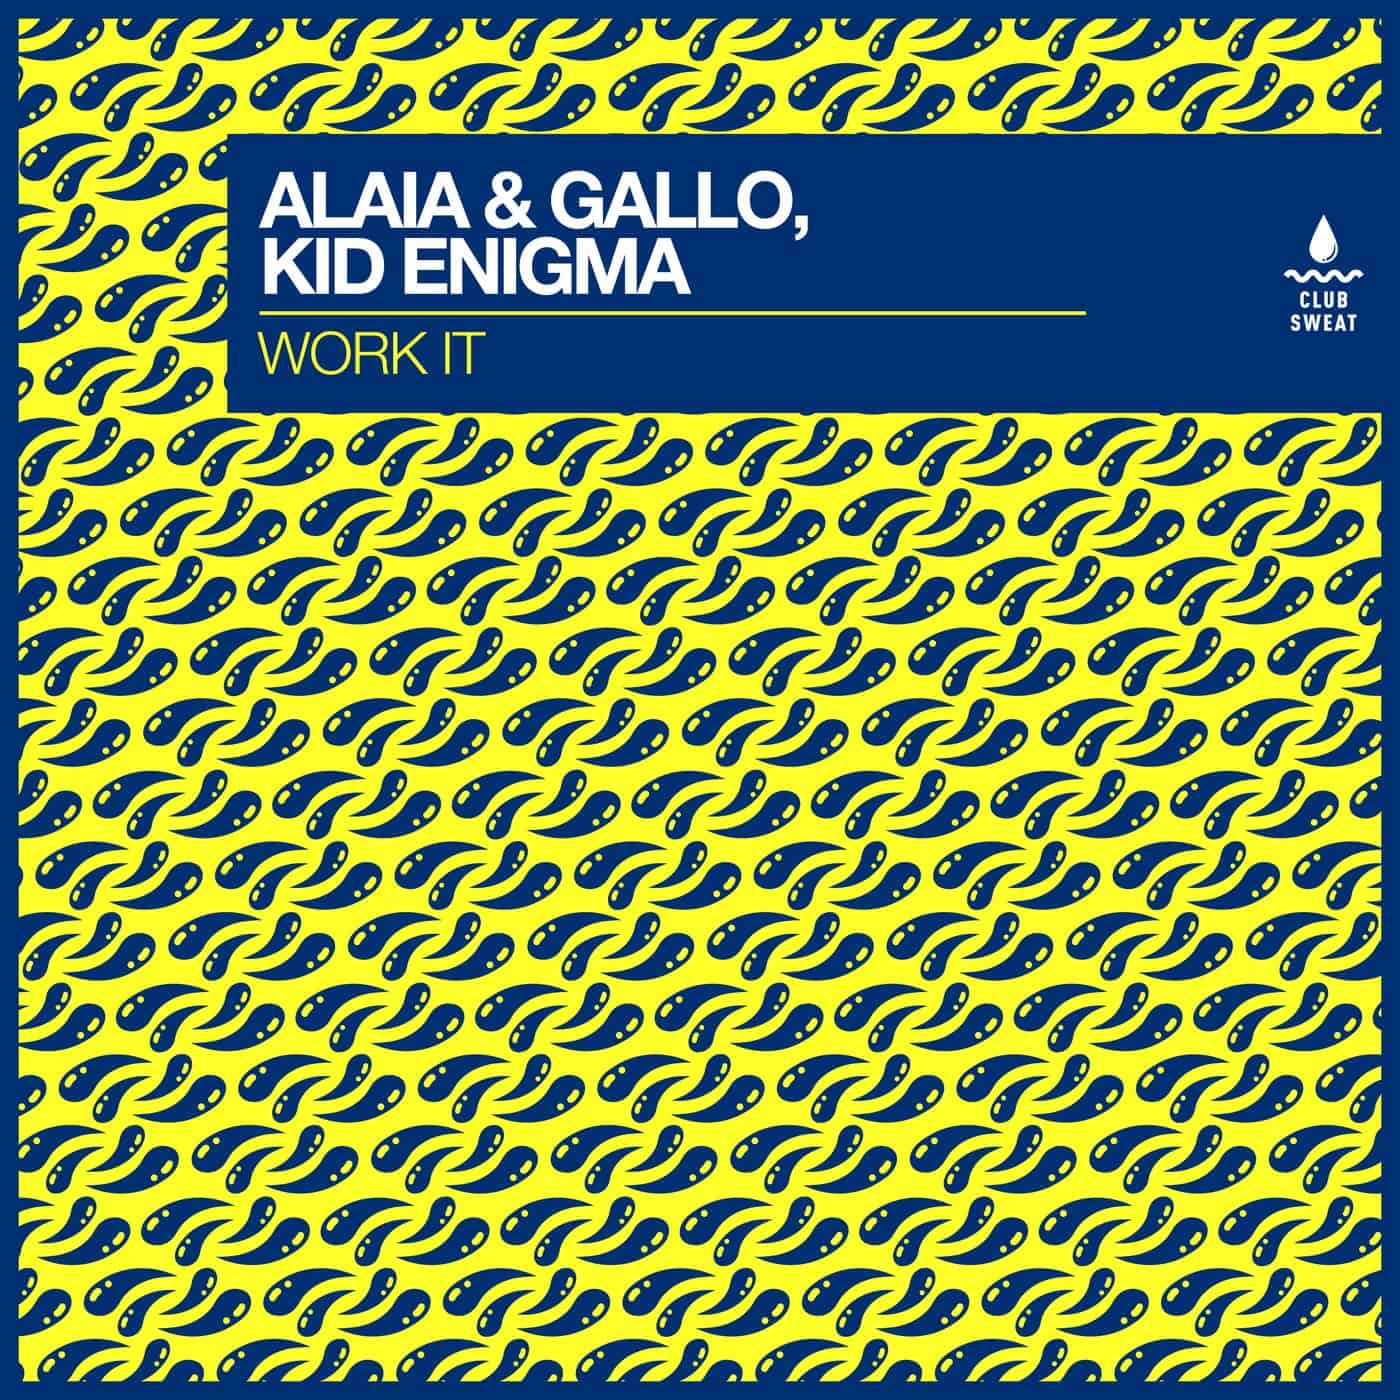 image cover: Work It (Extended Mix) by Kid Enigma, Alaia & Gallo on Club Sweat